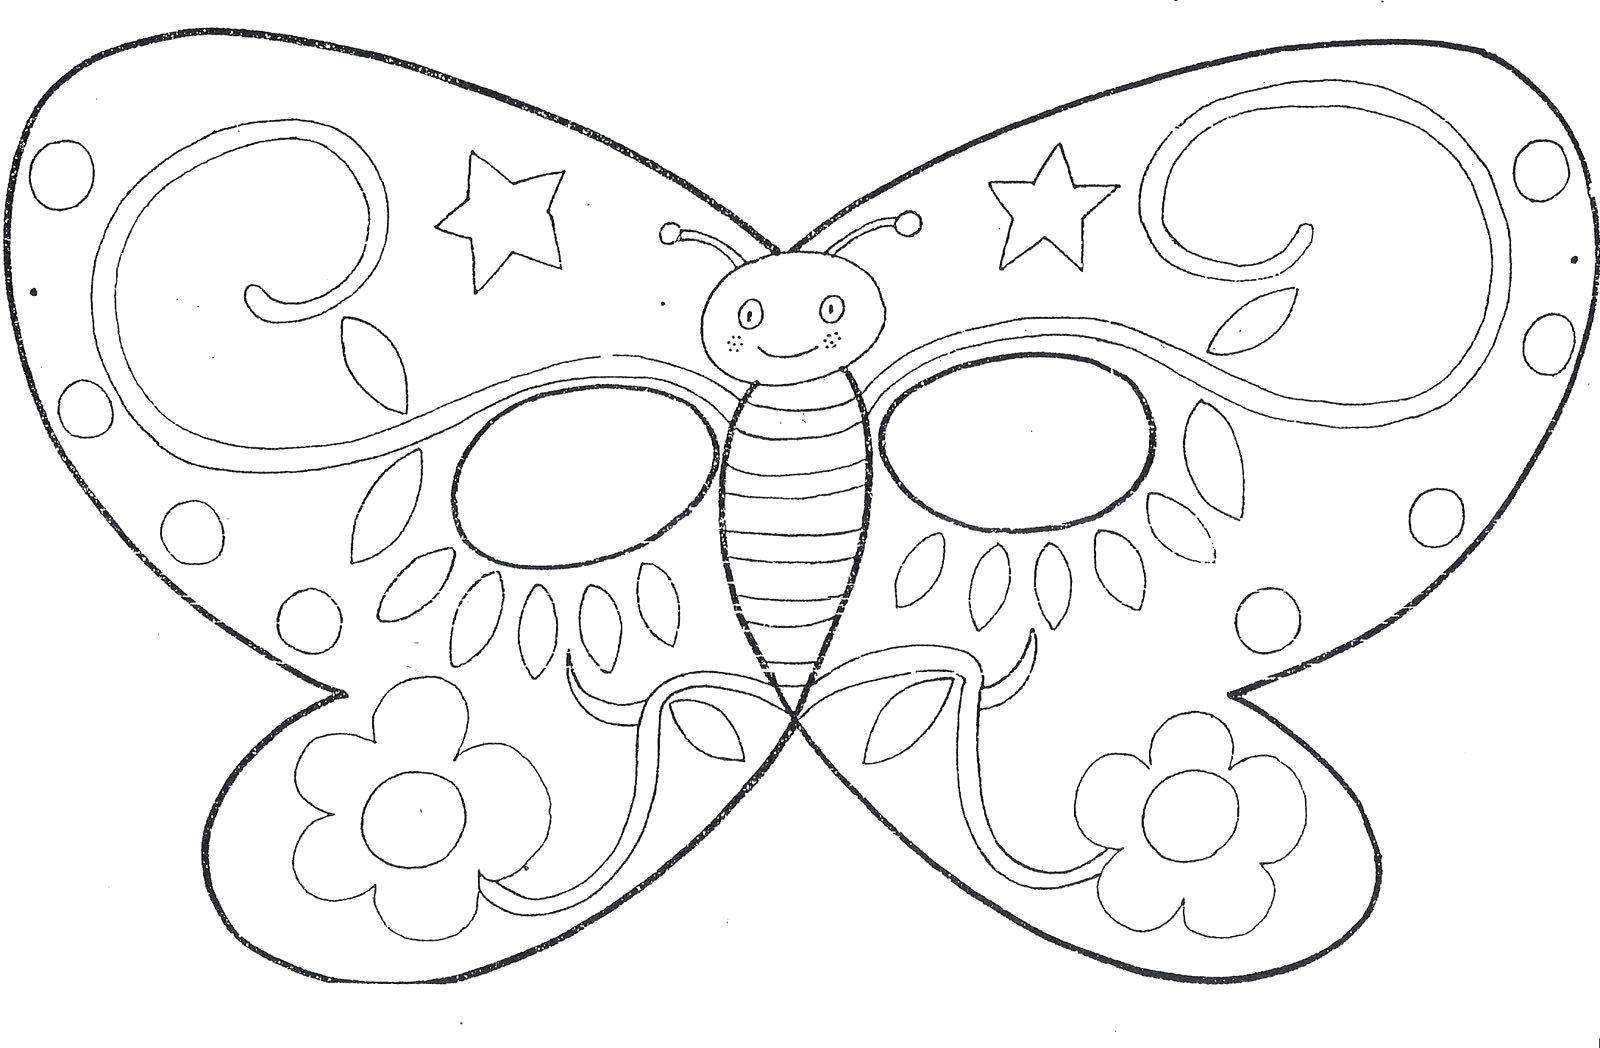 Coloring Patterned butterfly. Category butterfly. Tags:  Butterfly.